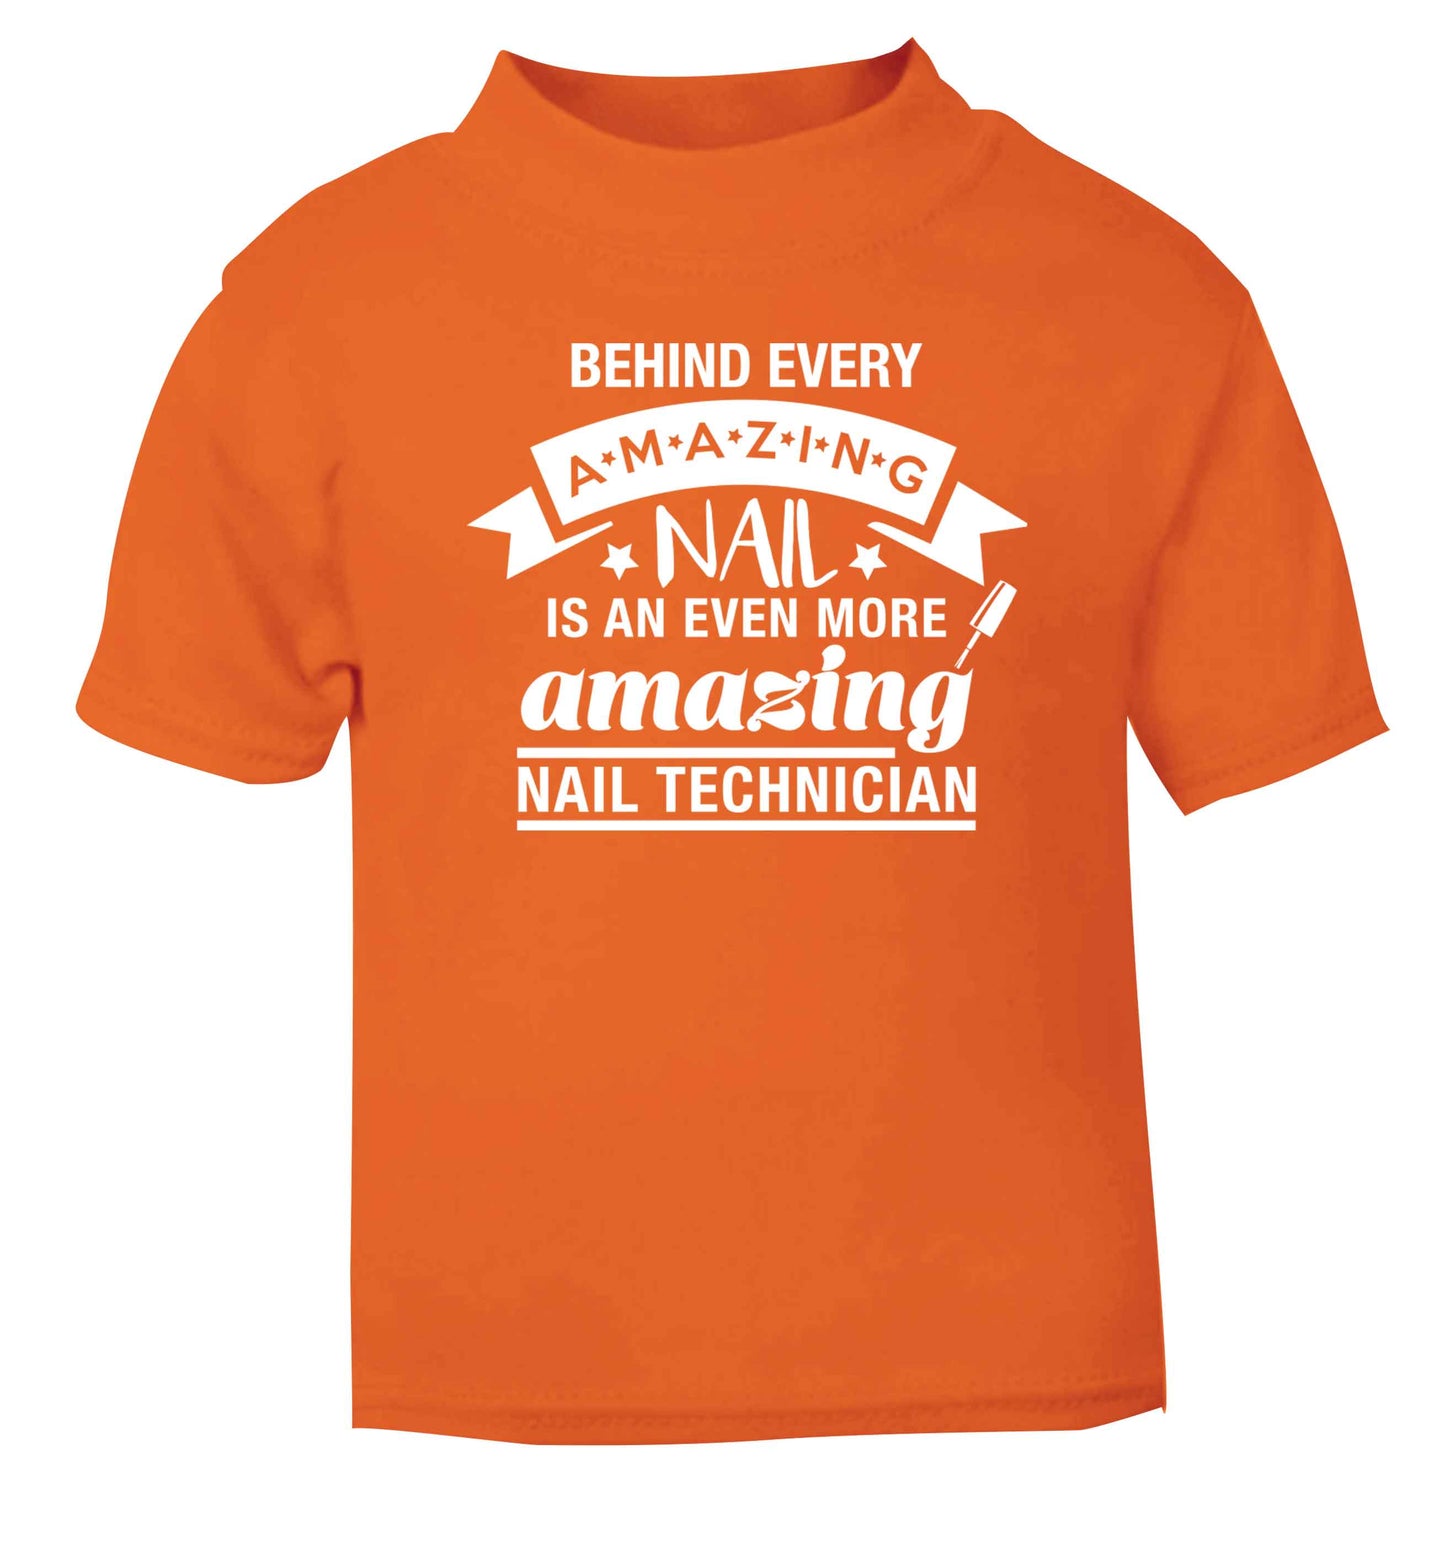 Behind every amazing nail is an even more amazing nail technician orange baby toddler Tshirt 2 Years